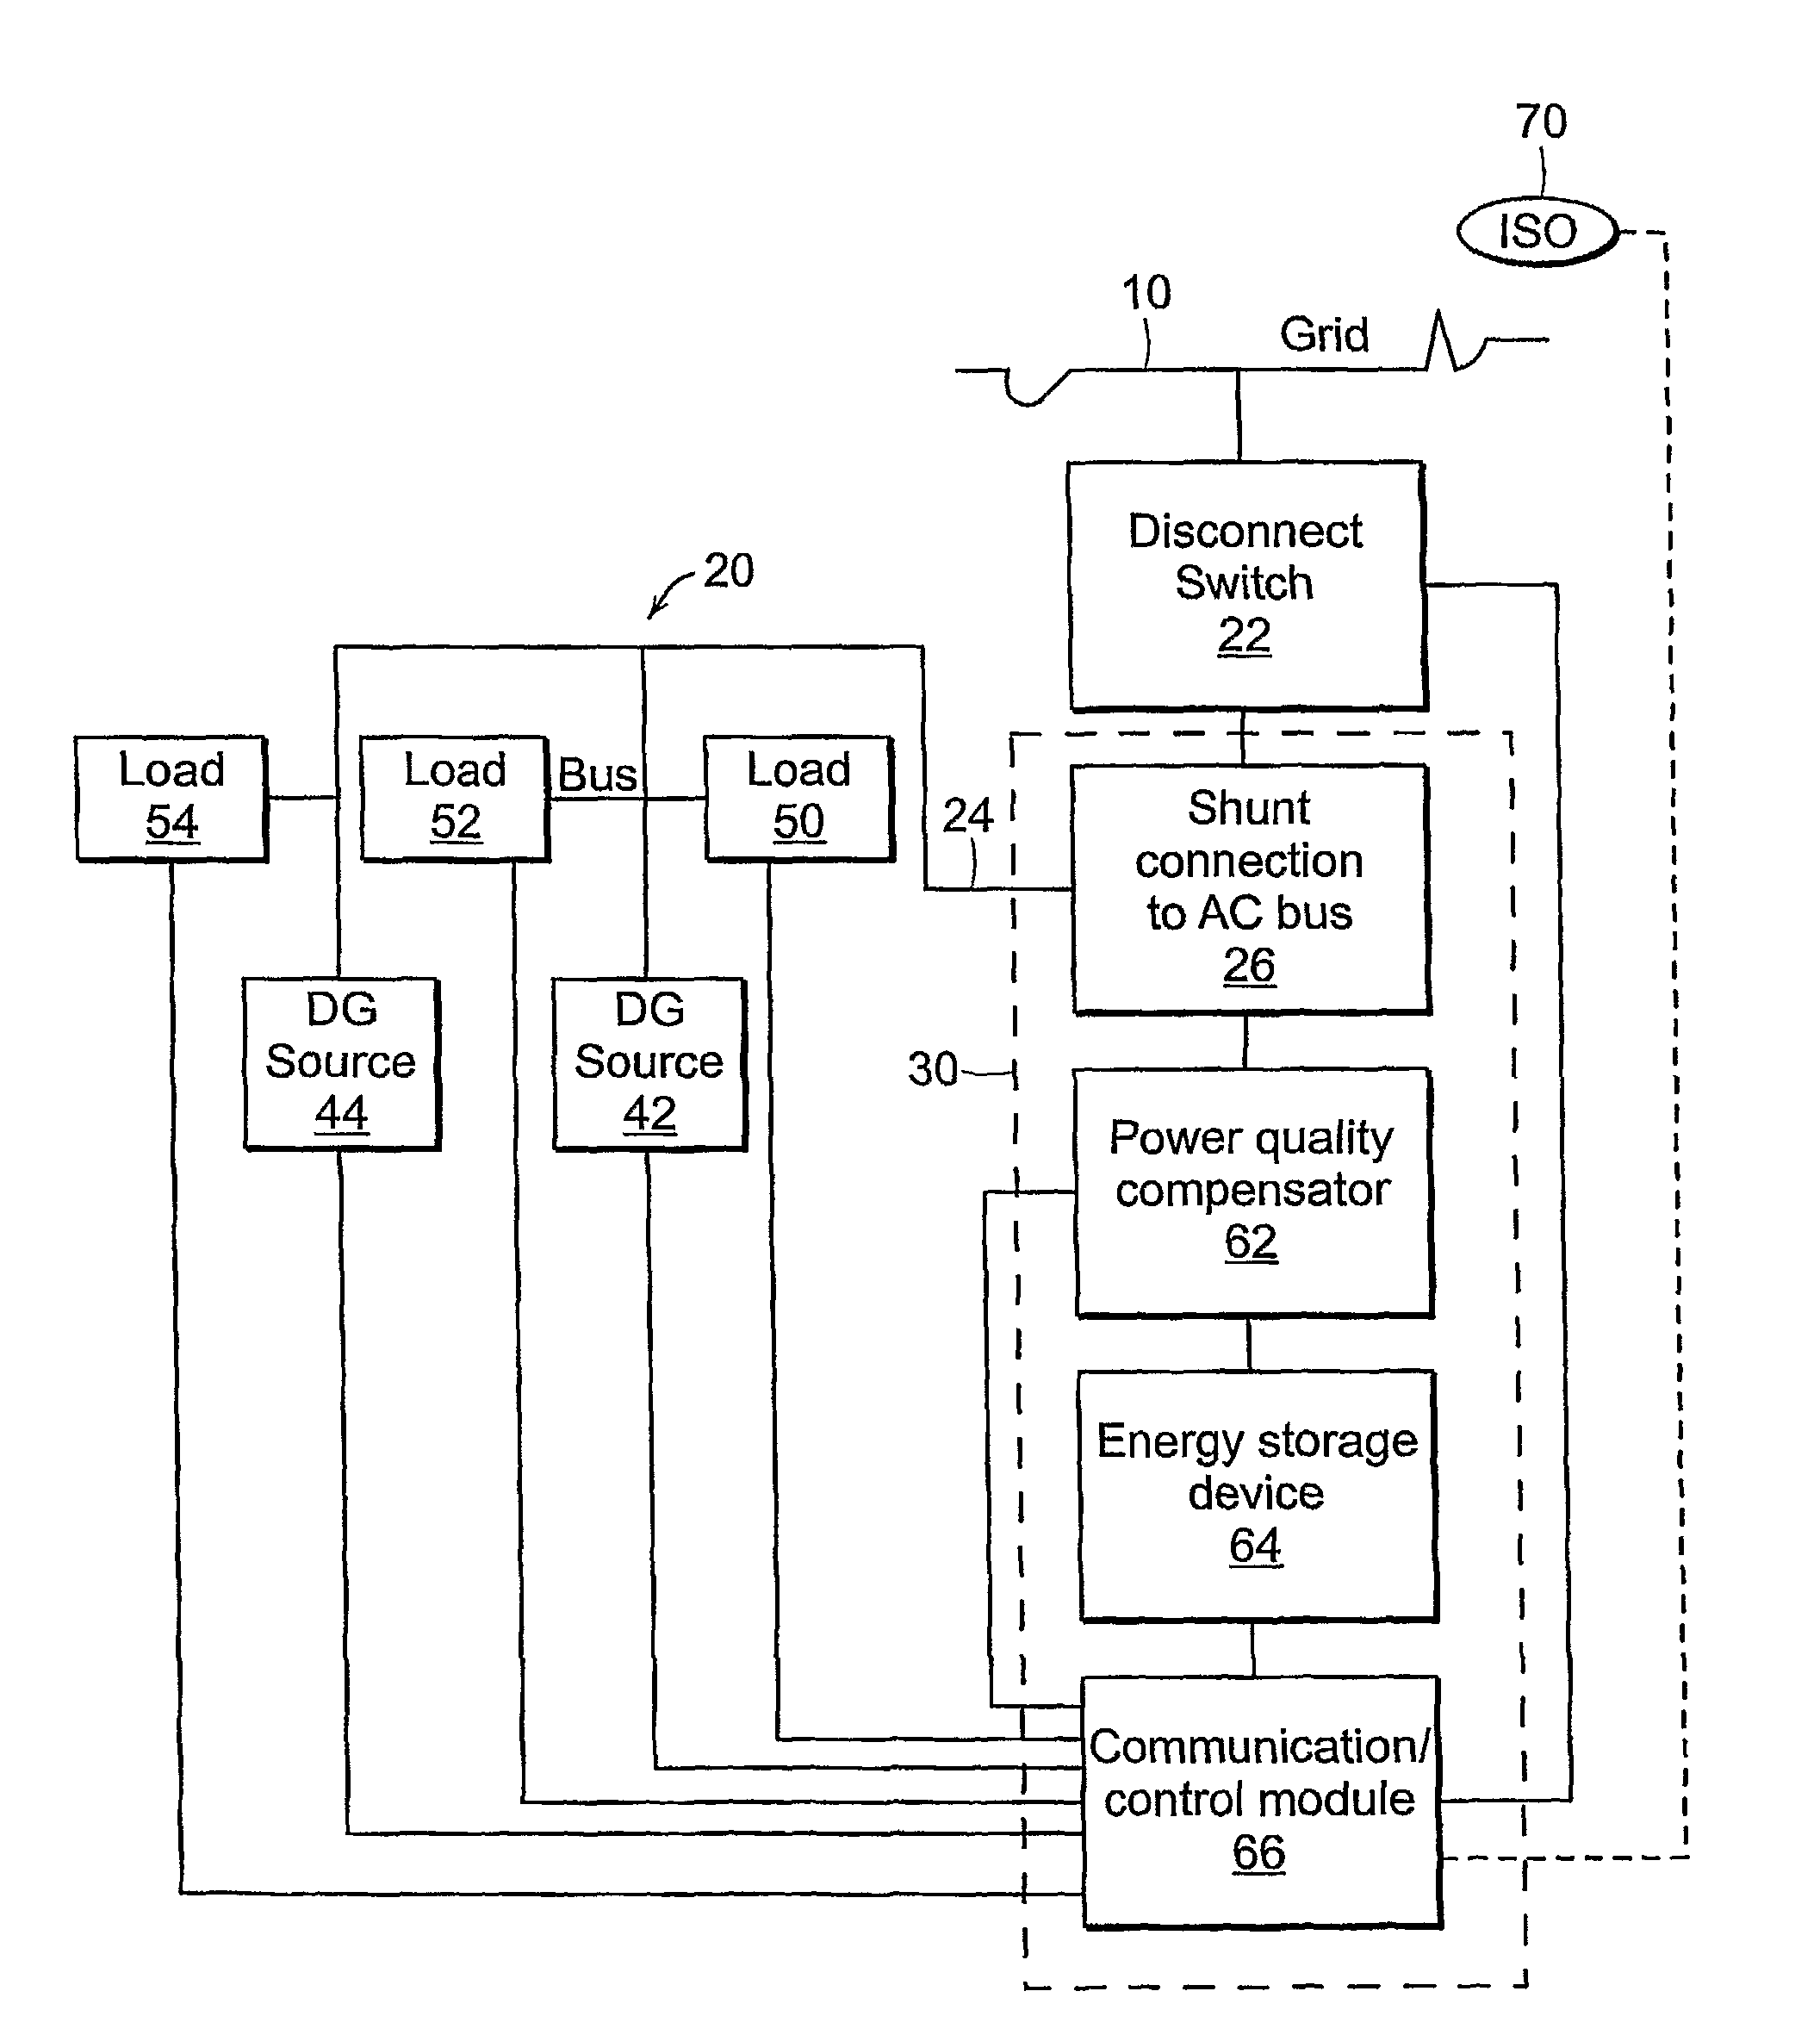 Methods and systems for intentionally isolating distributed power generation sources